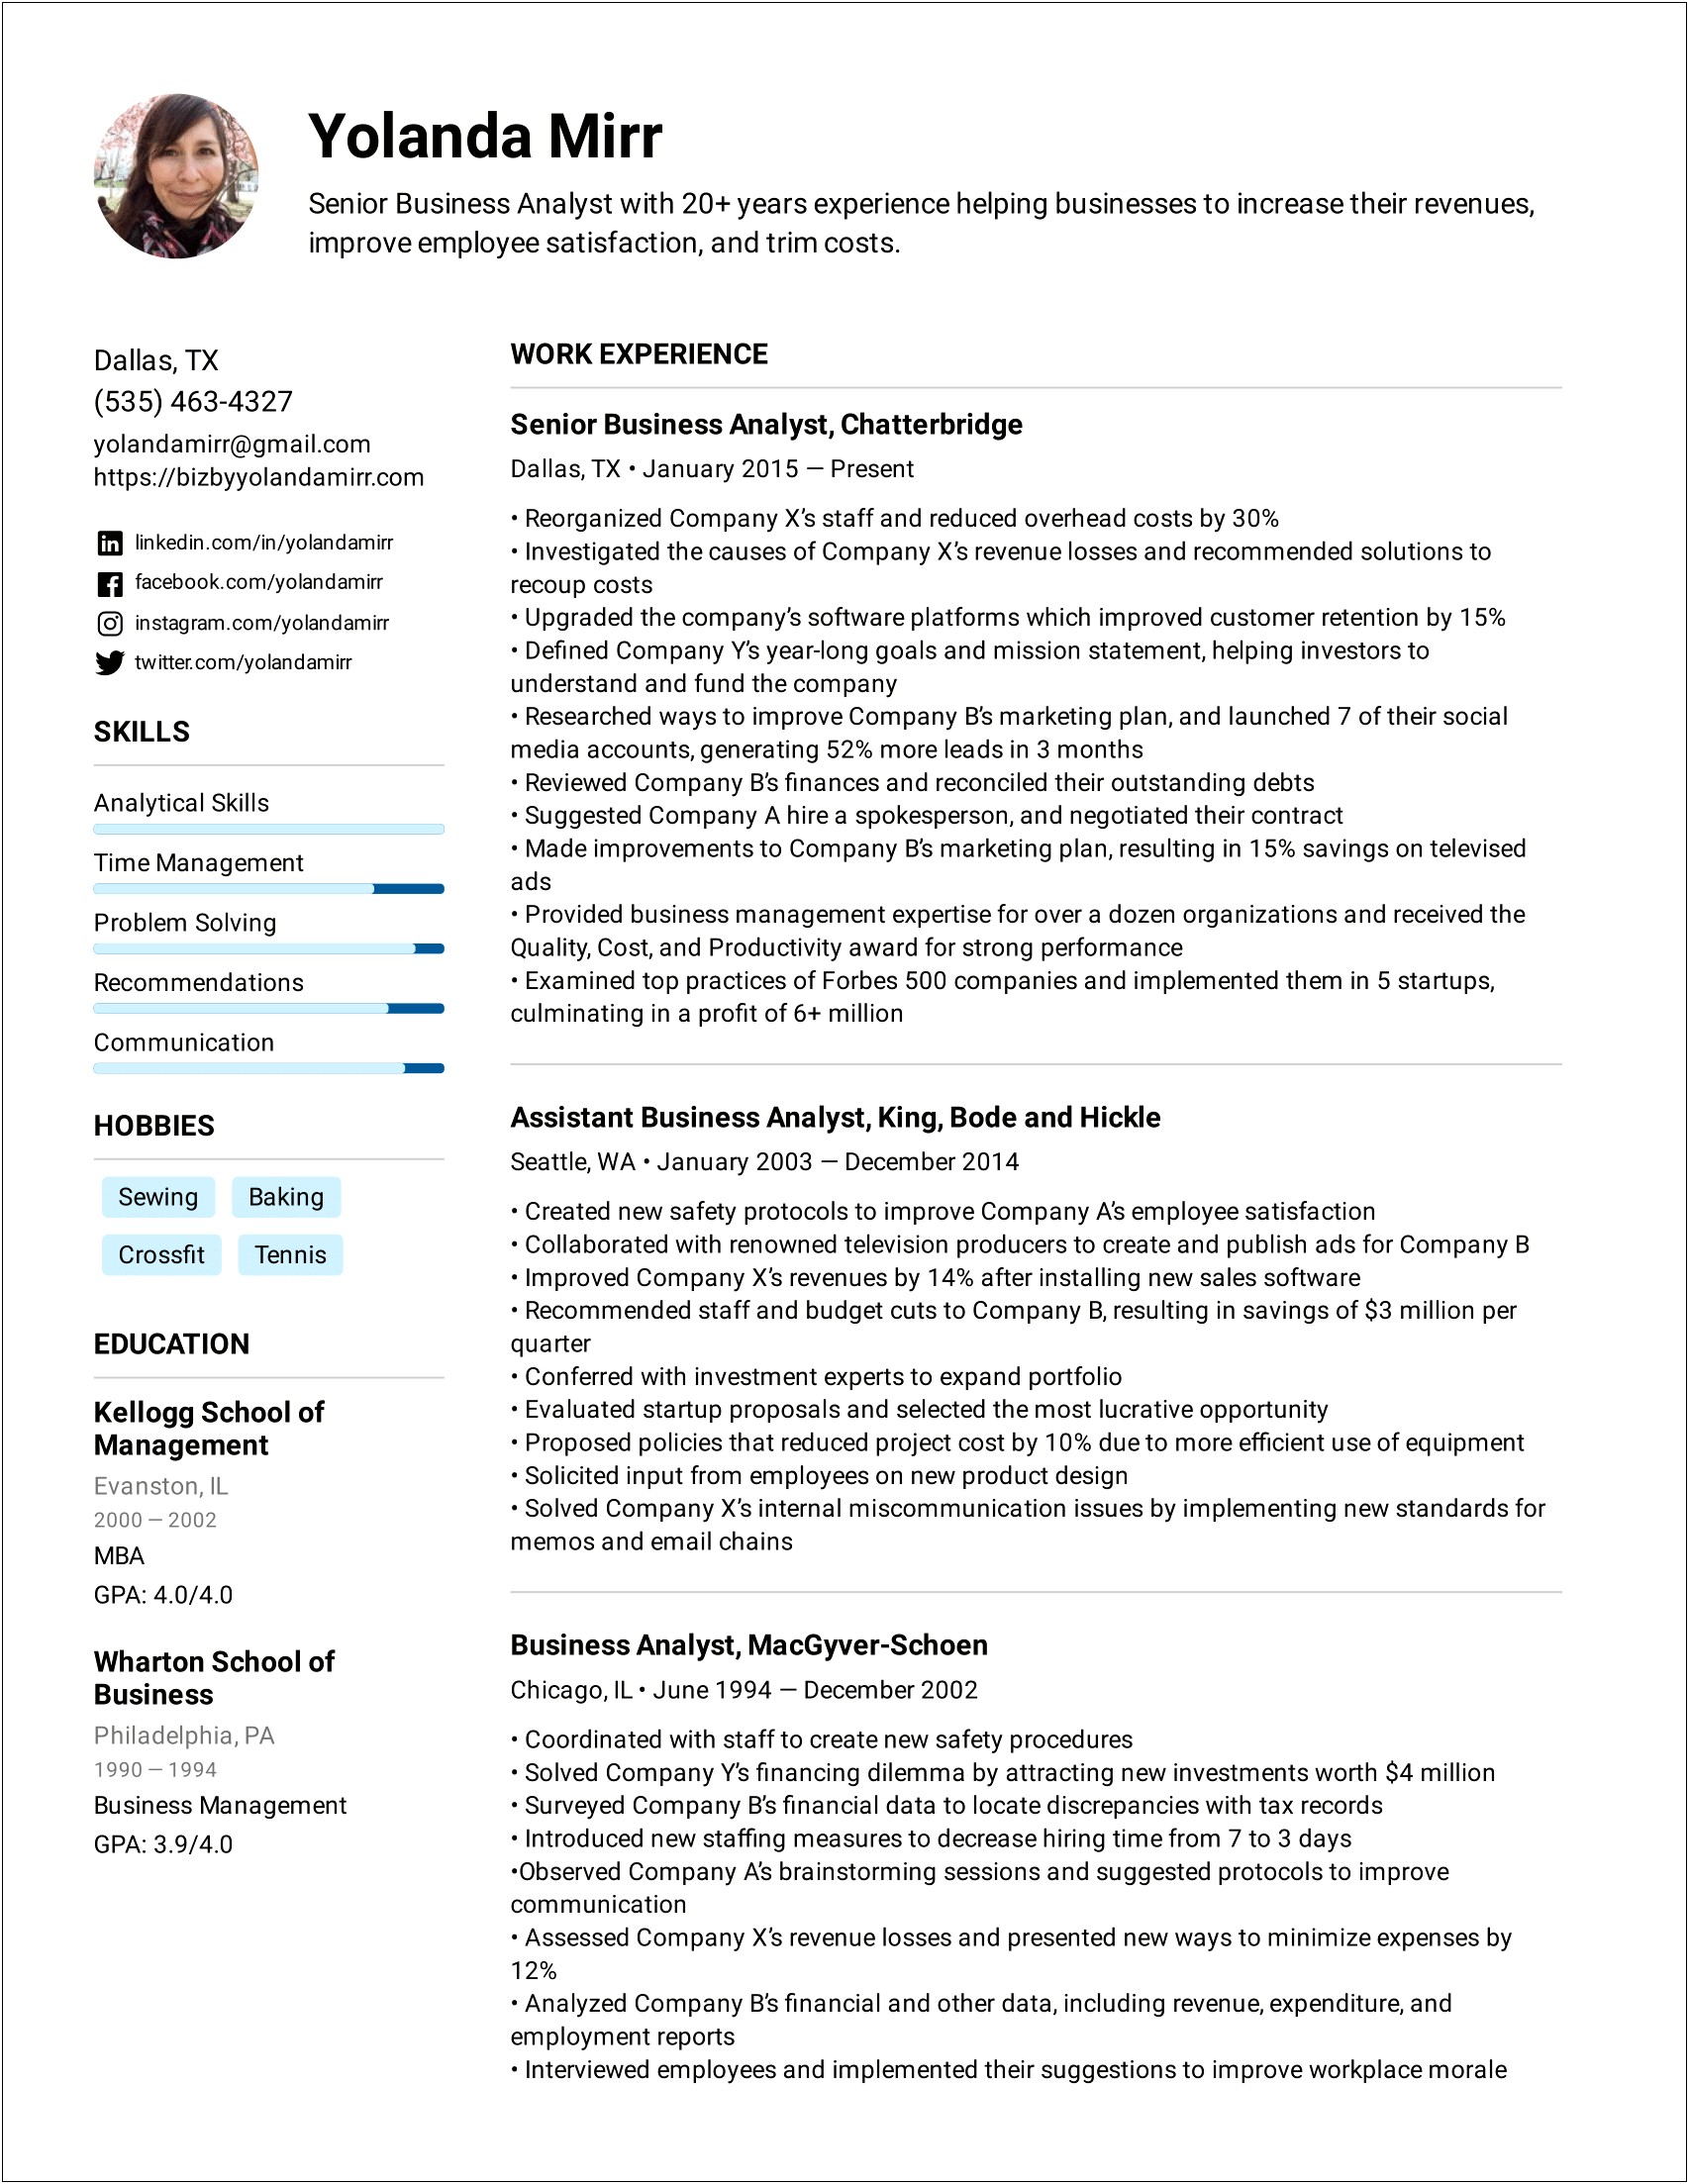 Healtcare Business Analyst Fresher Resume Samples